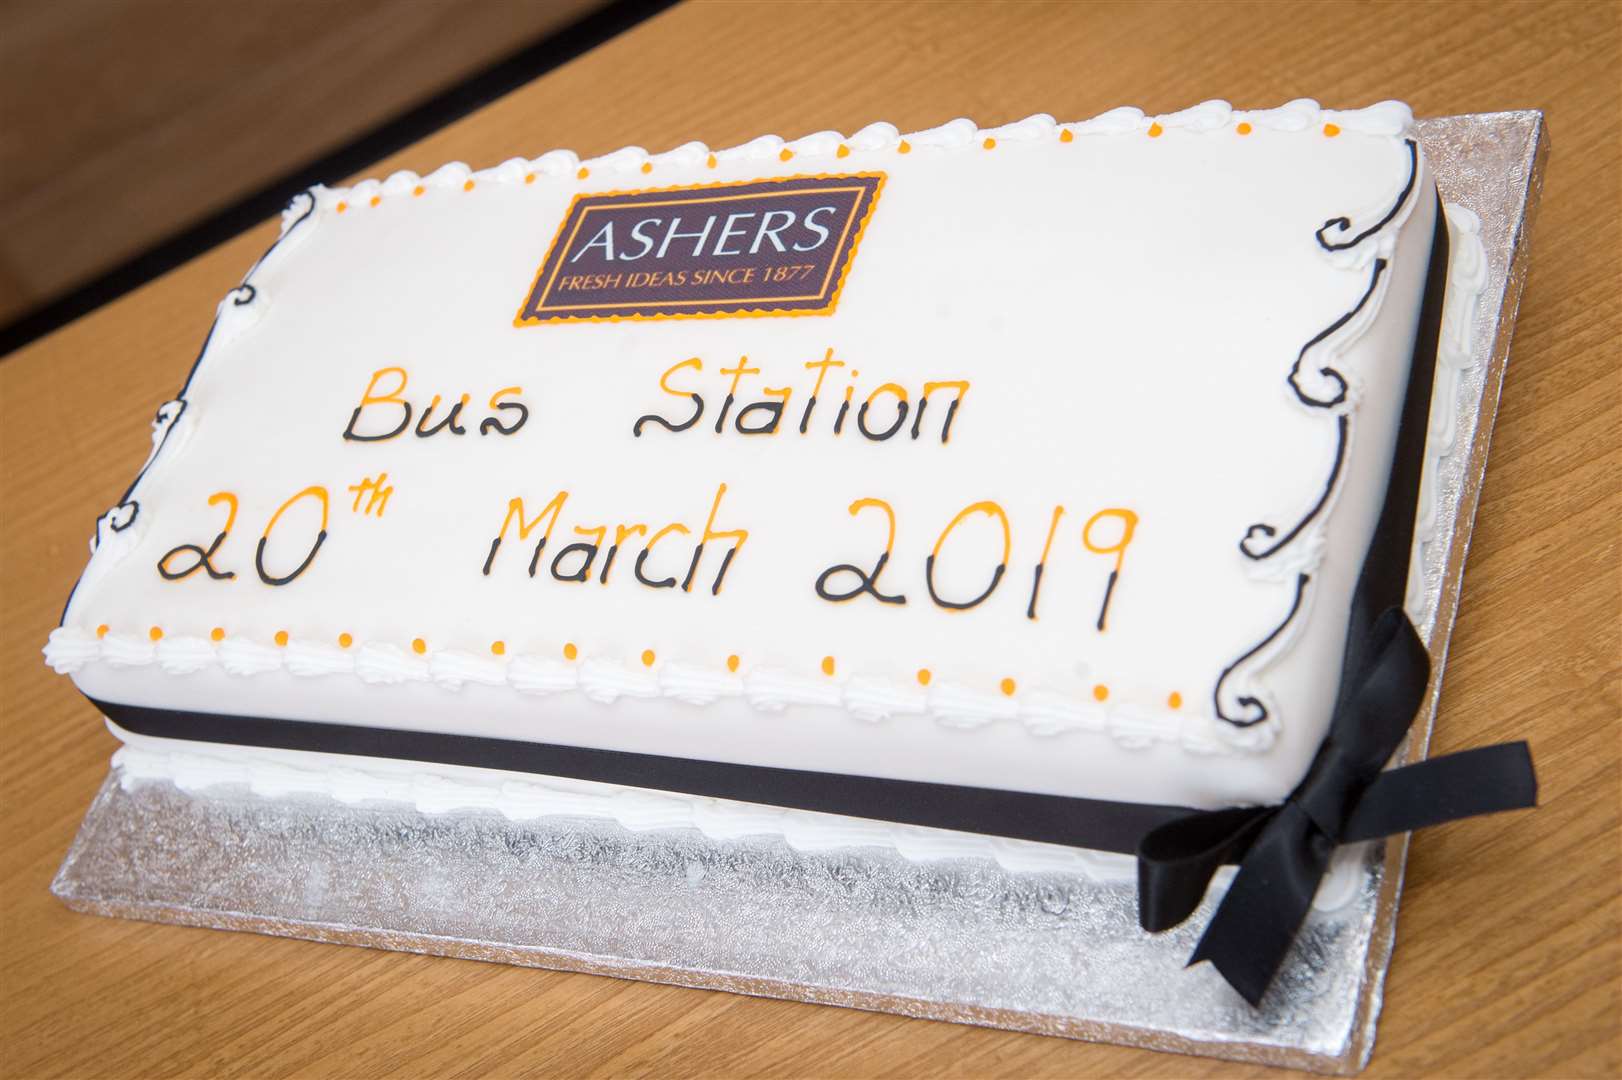 The Ashers bus station cafe has been reopened after a refurbishment.